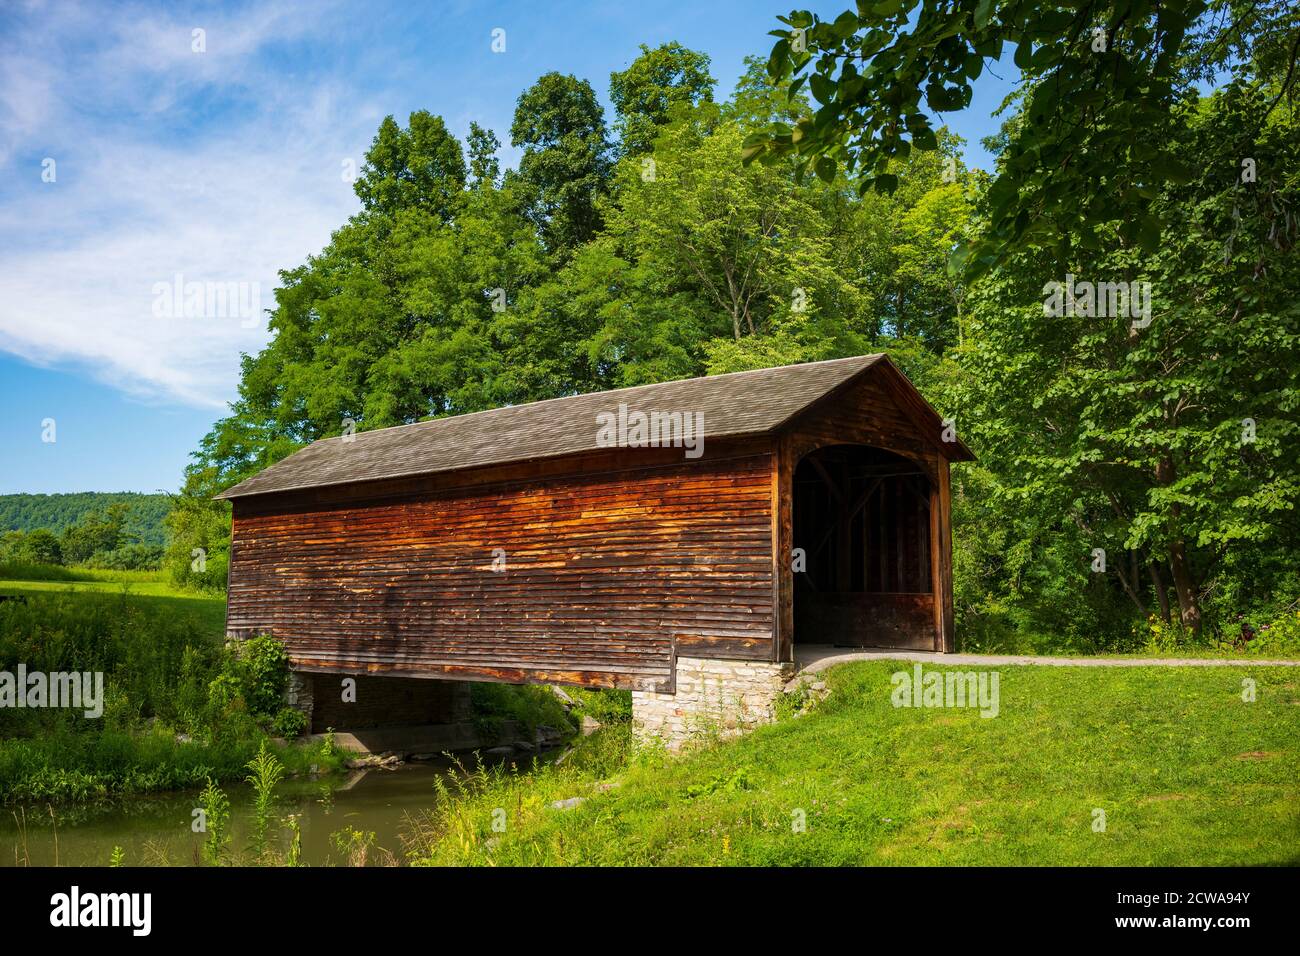 The Hyde Hall Covered Bridge, built in 1825 and is the oldest in the U.S., rests at the end of a dirt road during a summer day. Stock Photo